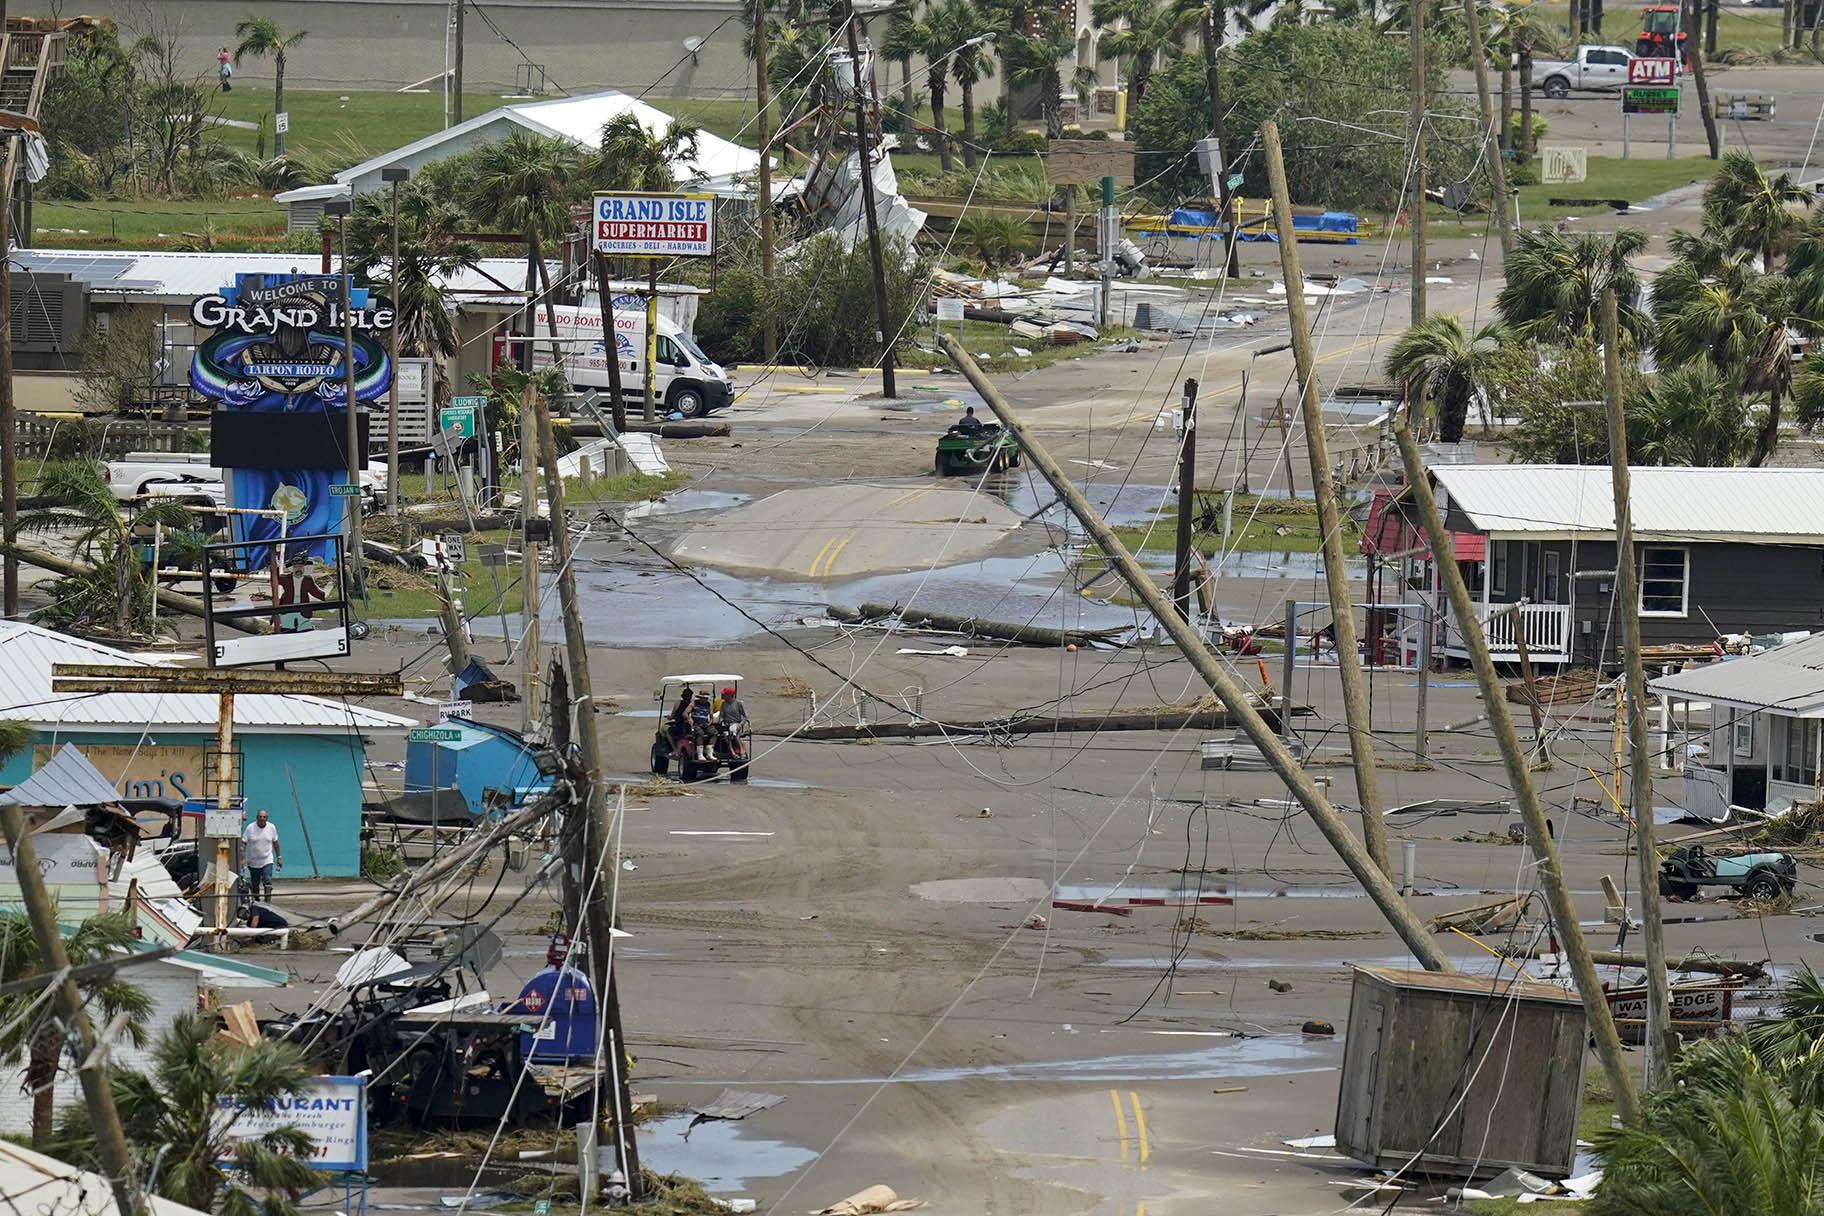 The remains of destroyed homes and businesses are seen in the aftermath of Hurricane Ida in Grand Isle, La., Tuesday, Aug. 31, 2021. (AP Photo / Gerald Herbert)